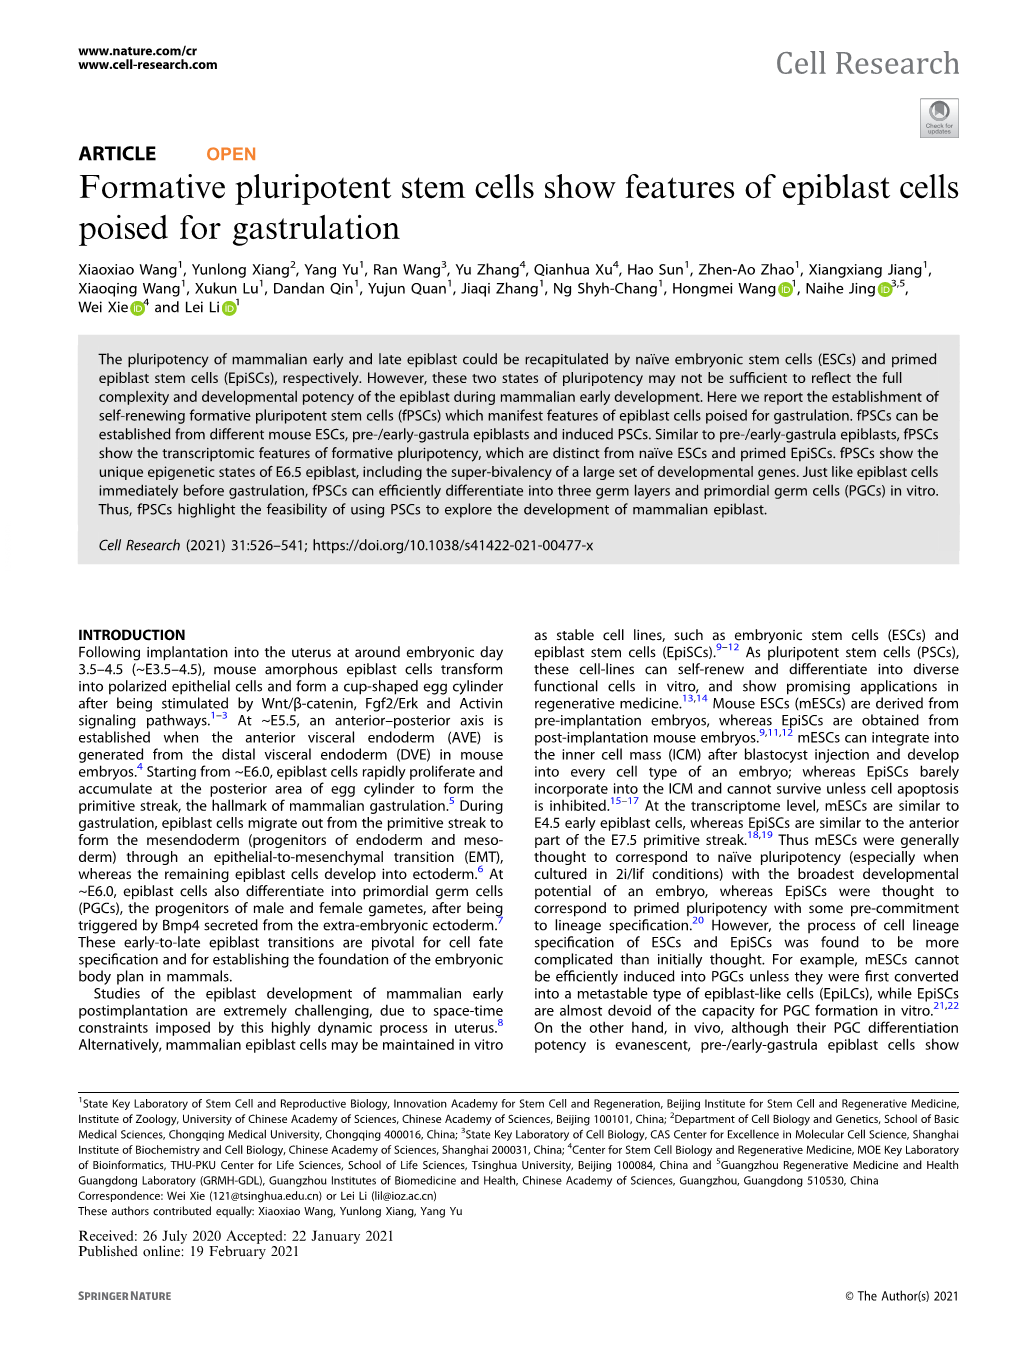 Formative Pluripotent Stem Cells Show Features of Epiblast Cells Poised for Gastrulation